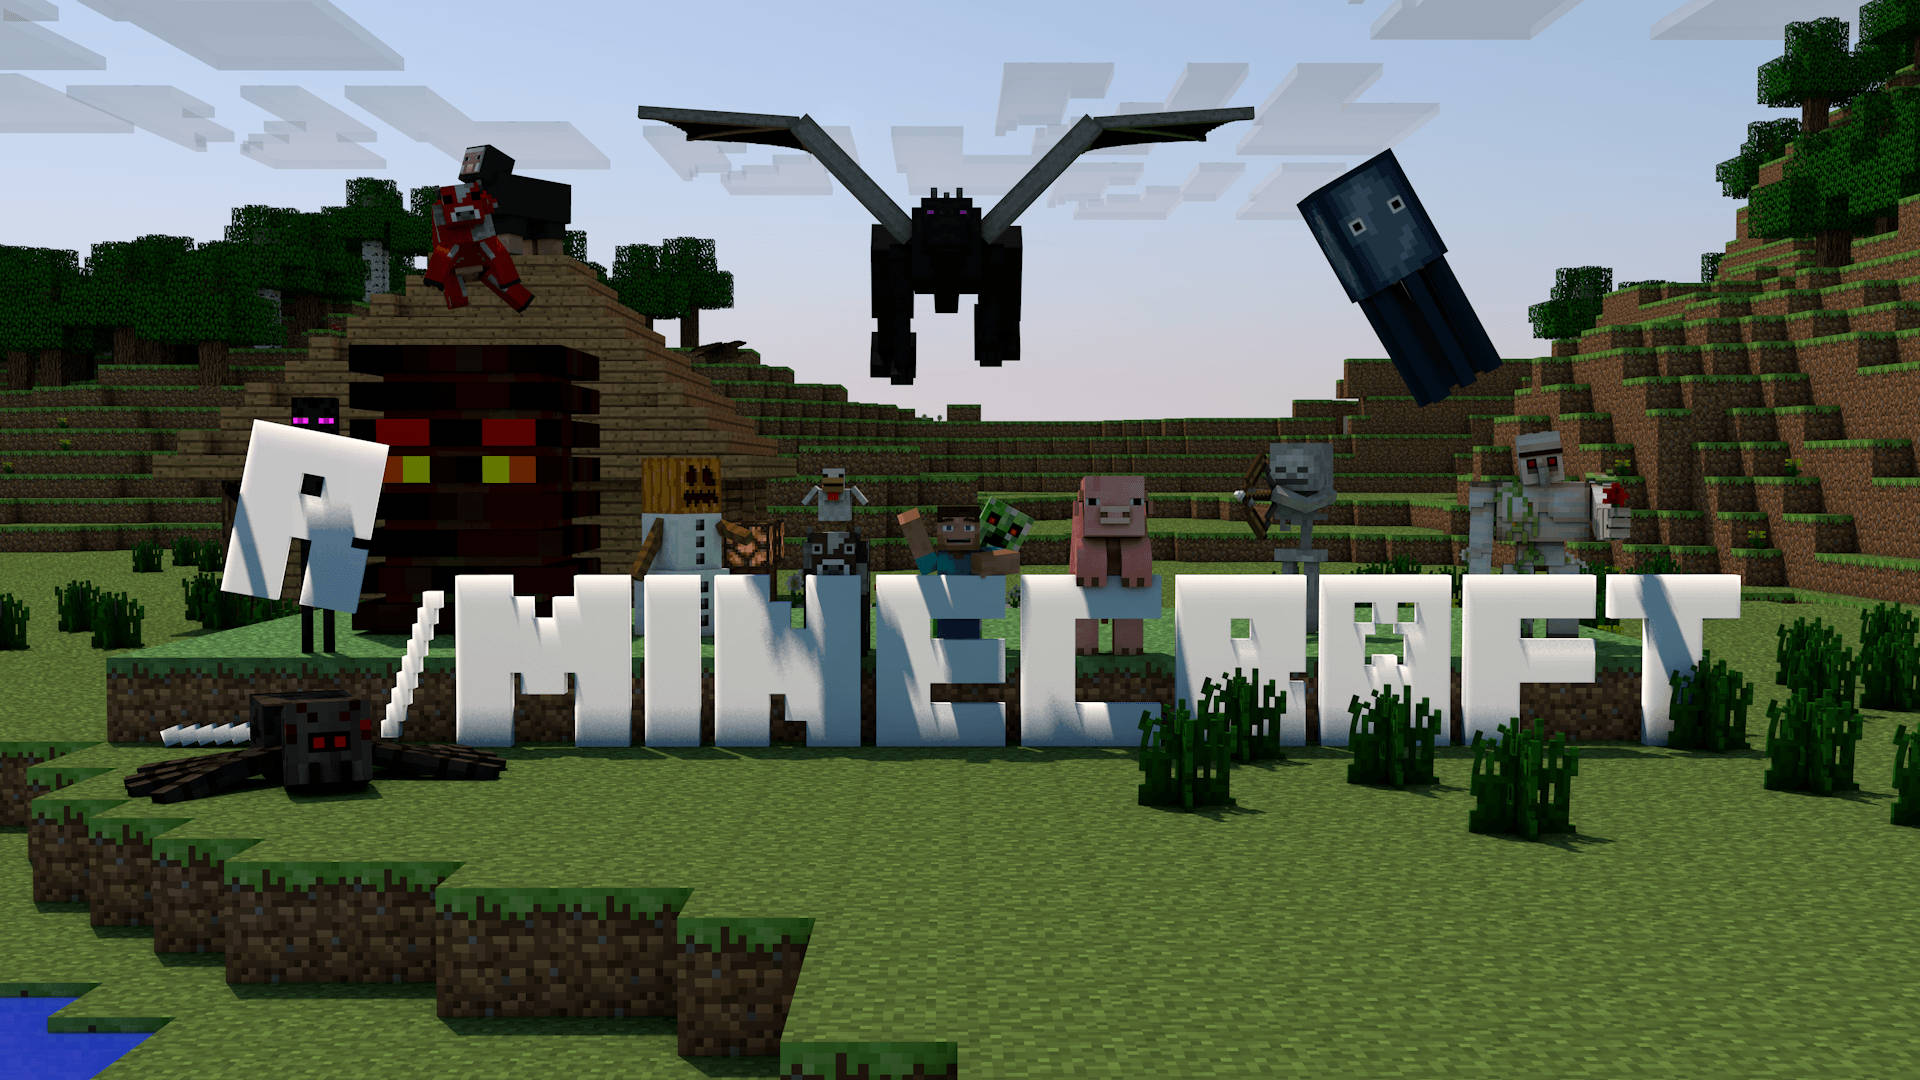 Moving Minecraft Welcoming Wallpaper